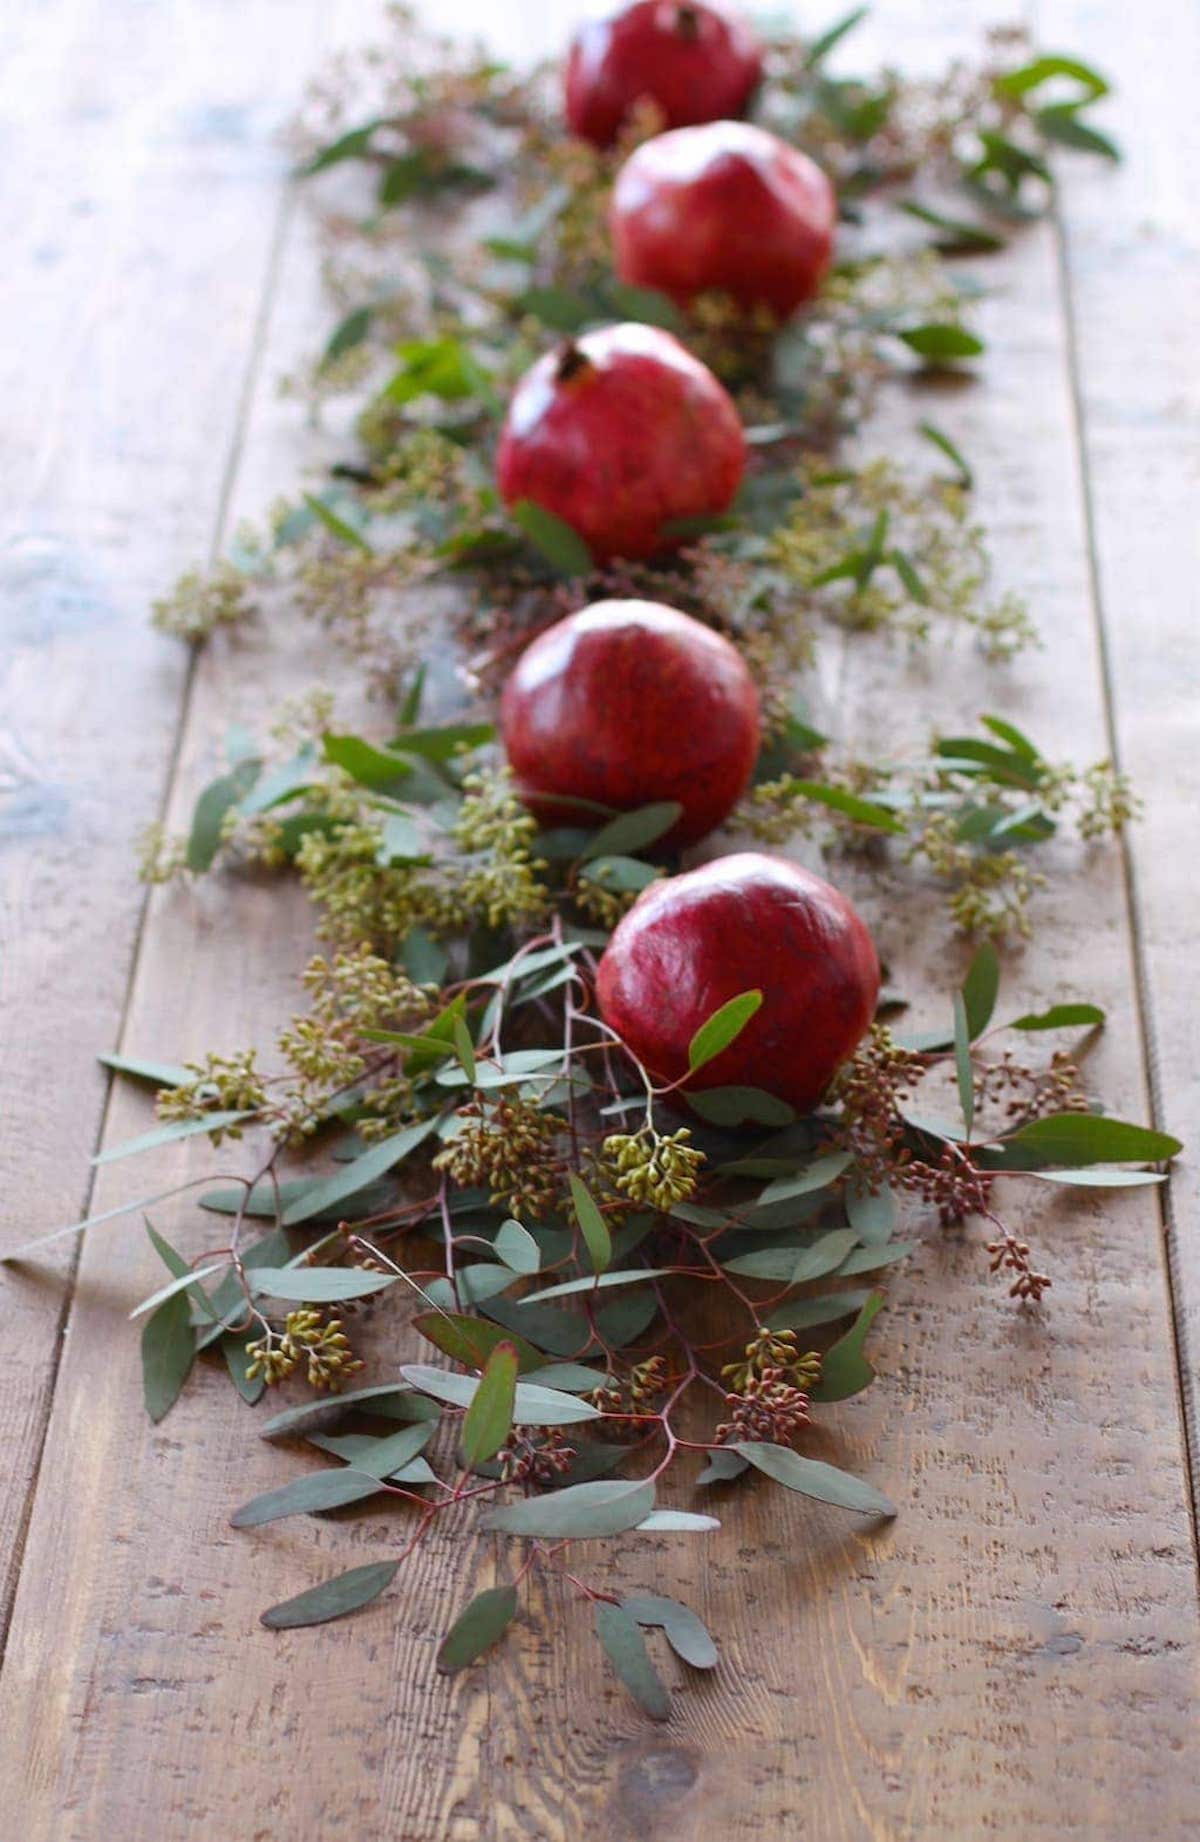 Pomegranate and eucalyptus leaves create a stunning Christmas candle centerpiece on a wooden table.